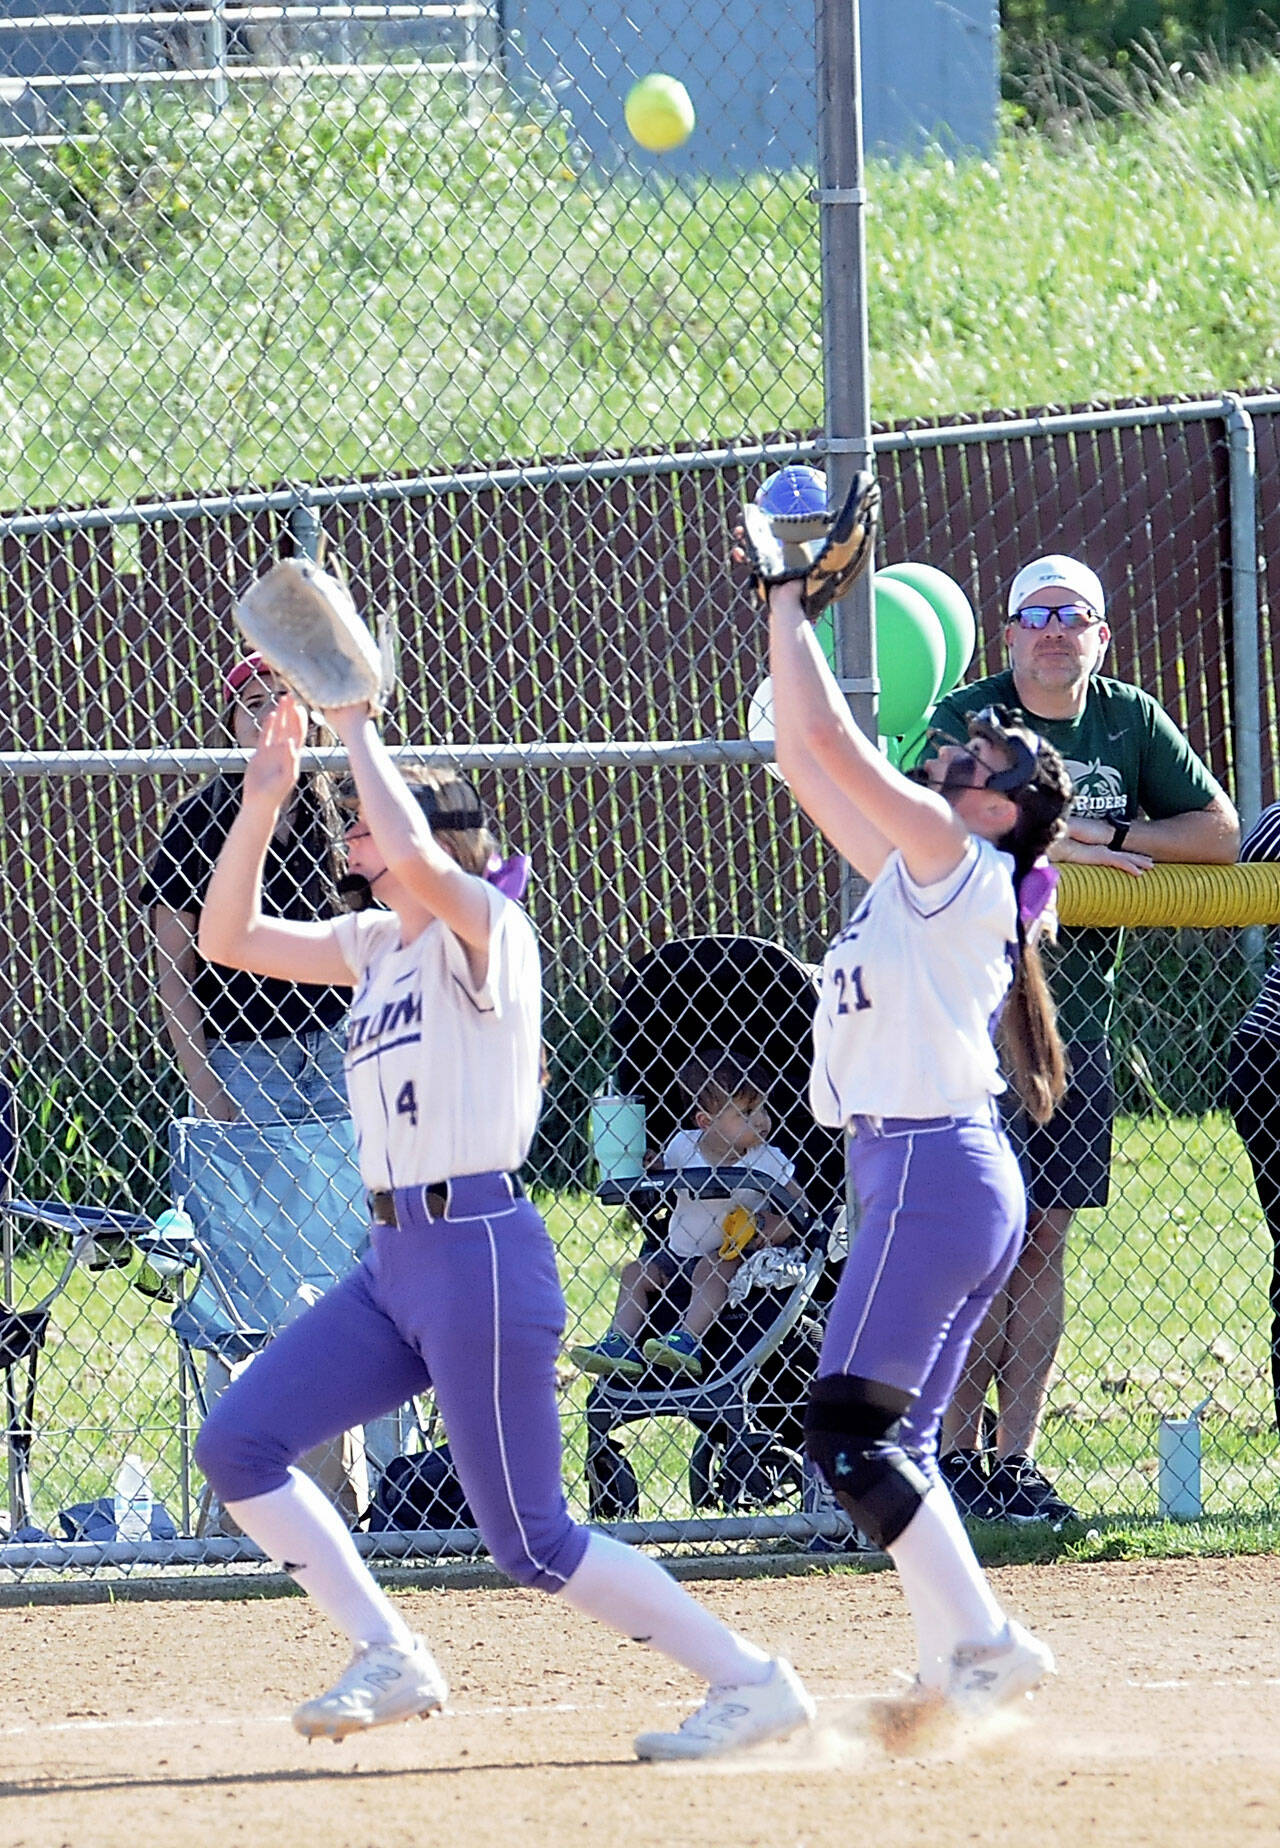 Sequim’s Ava Ritter, left, and Hannah Bates both reach for a pop fly against Port Angeles with Bates eventually making the catch on Friday in Port Angeles. (Keith Thorpe/Peninsula Daily News)